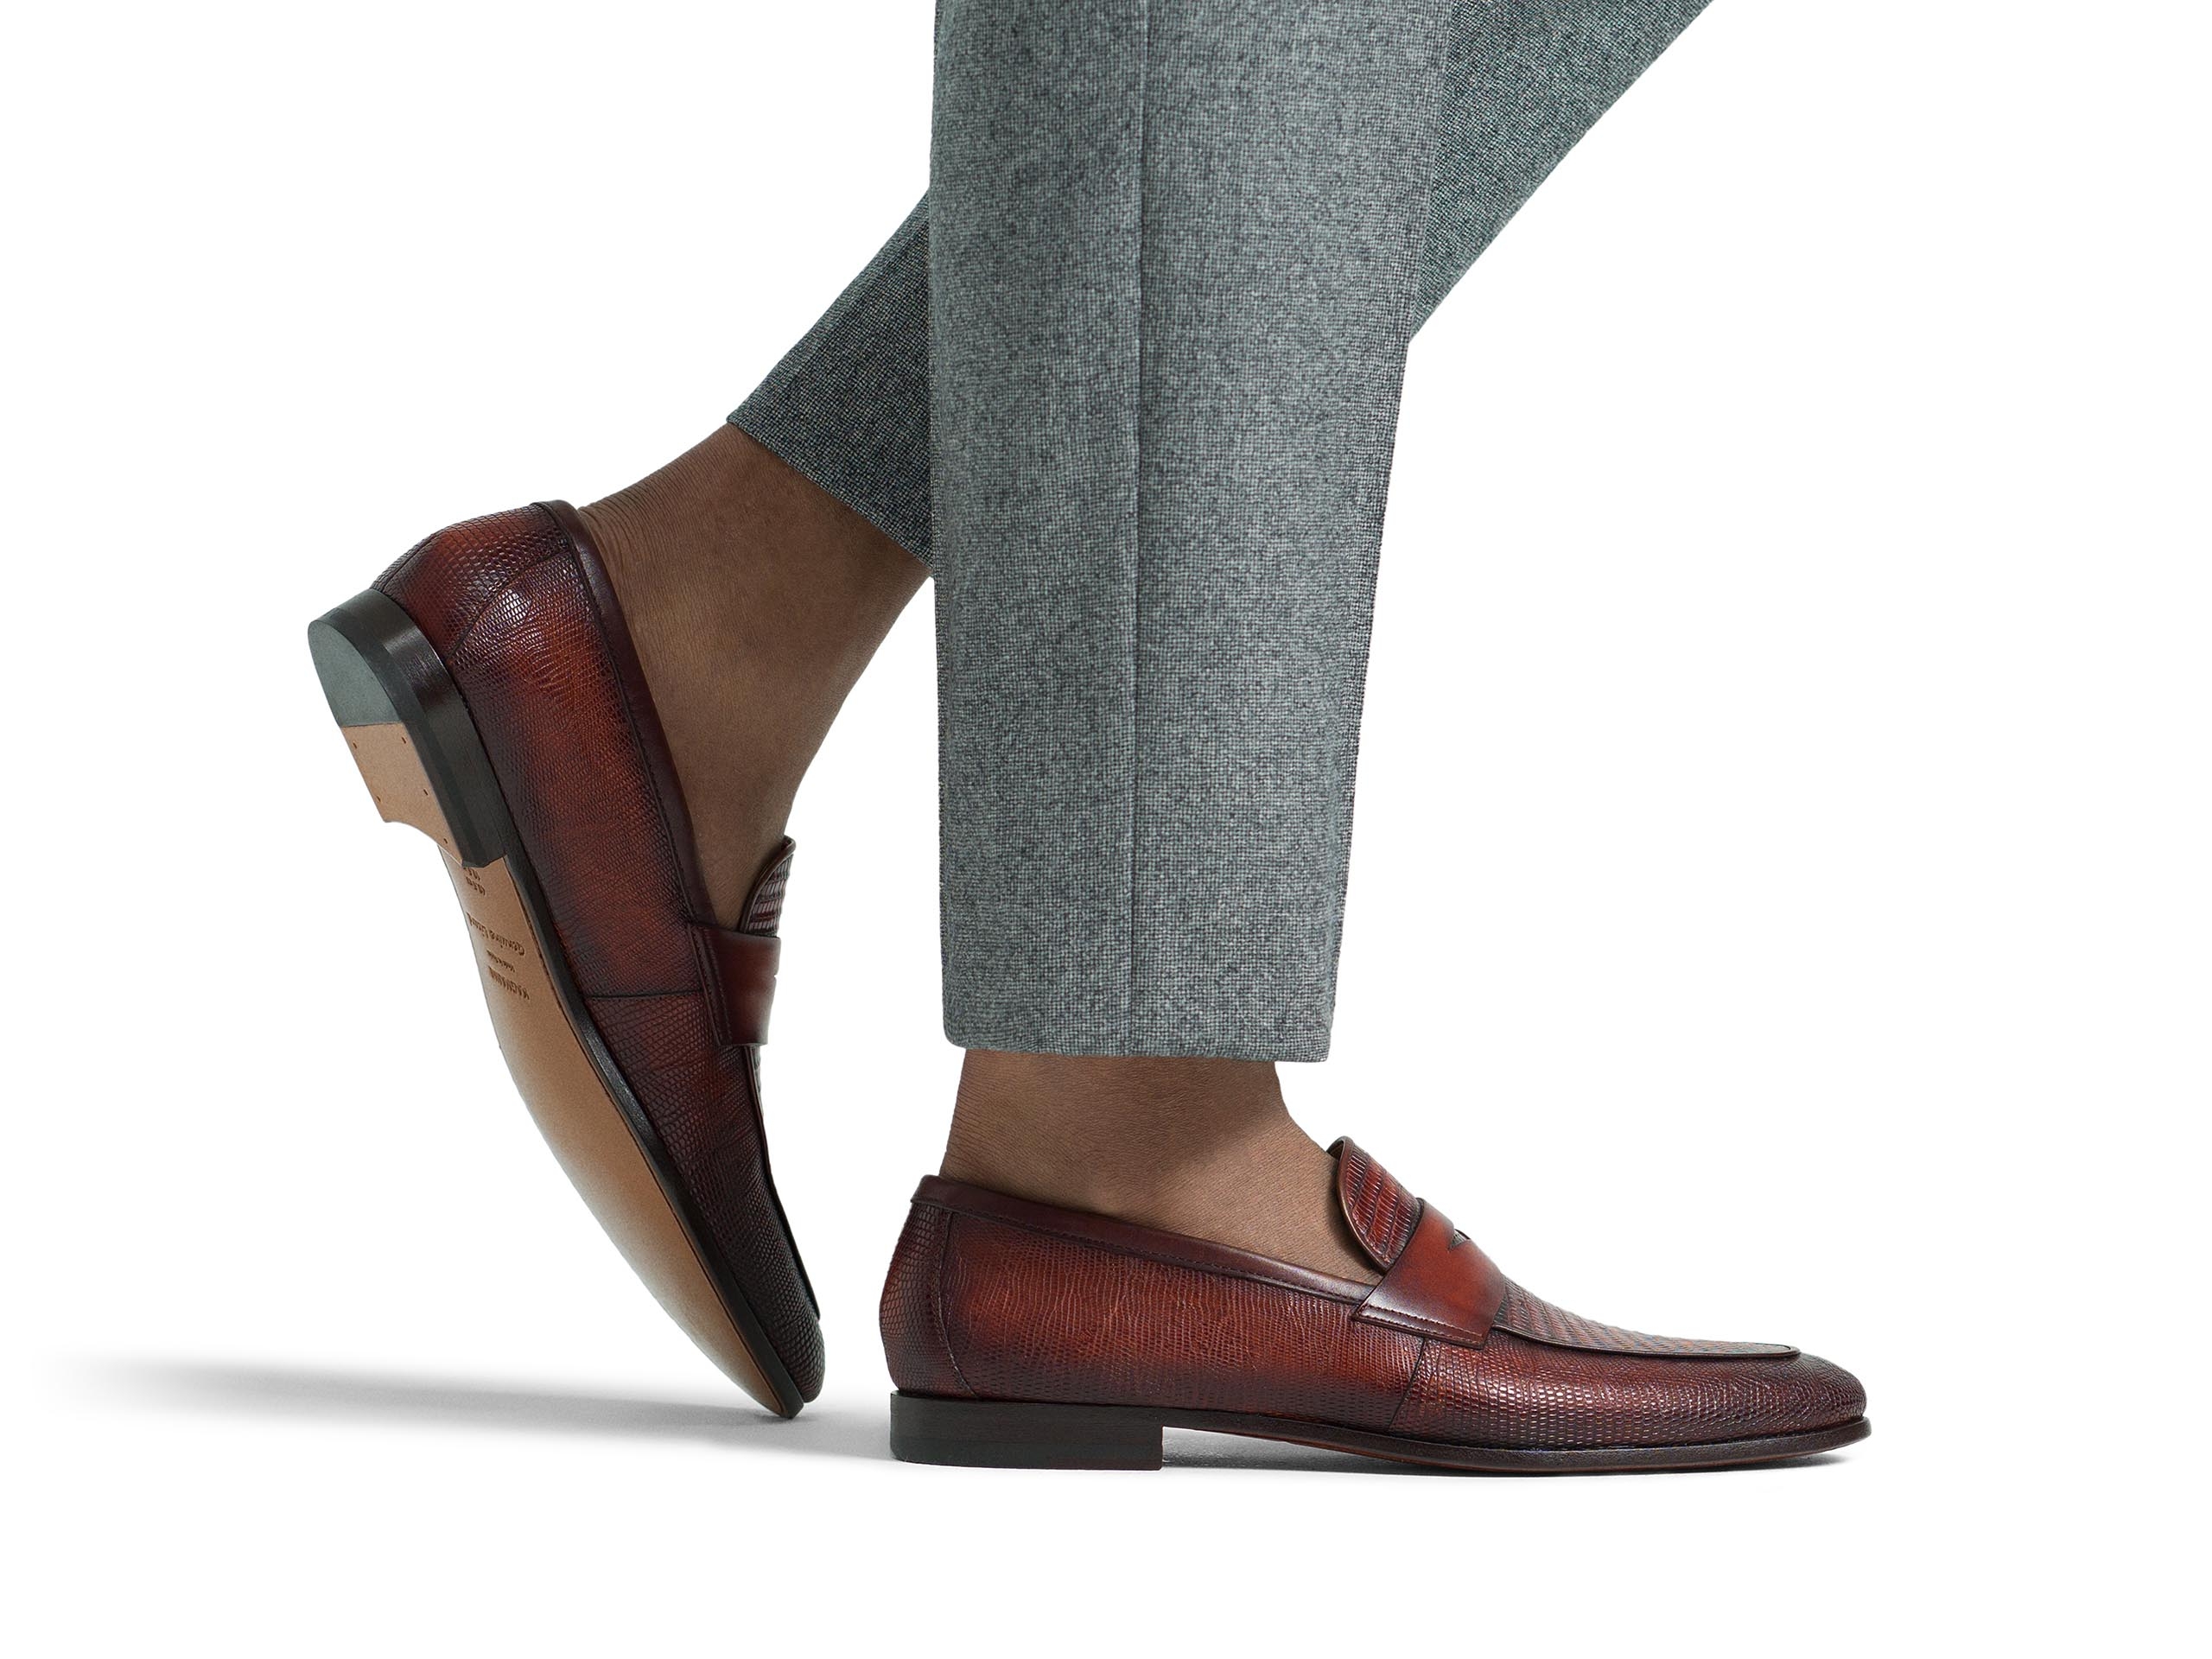 The Vicente Cognac pairs well with grey pants